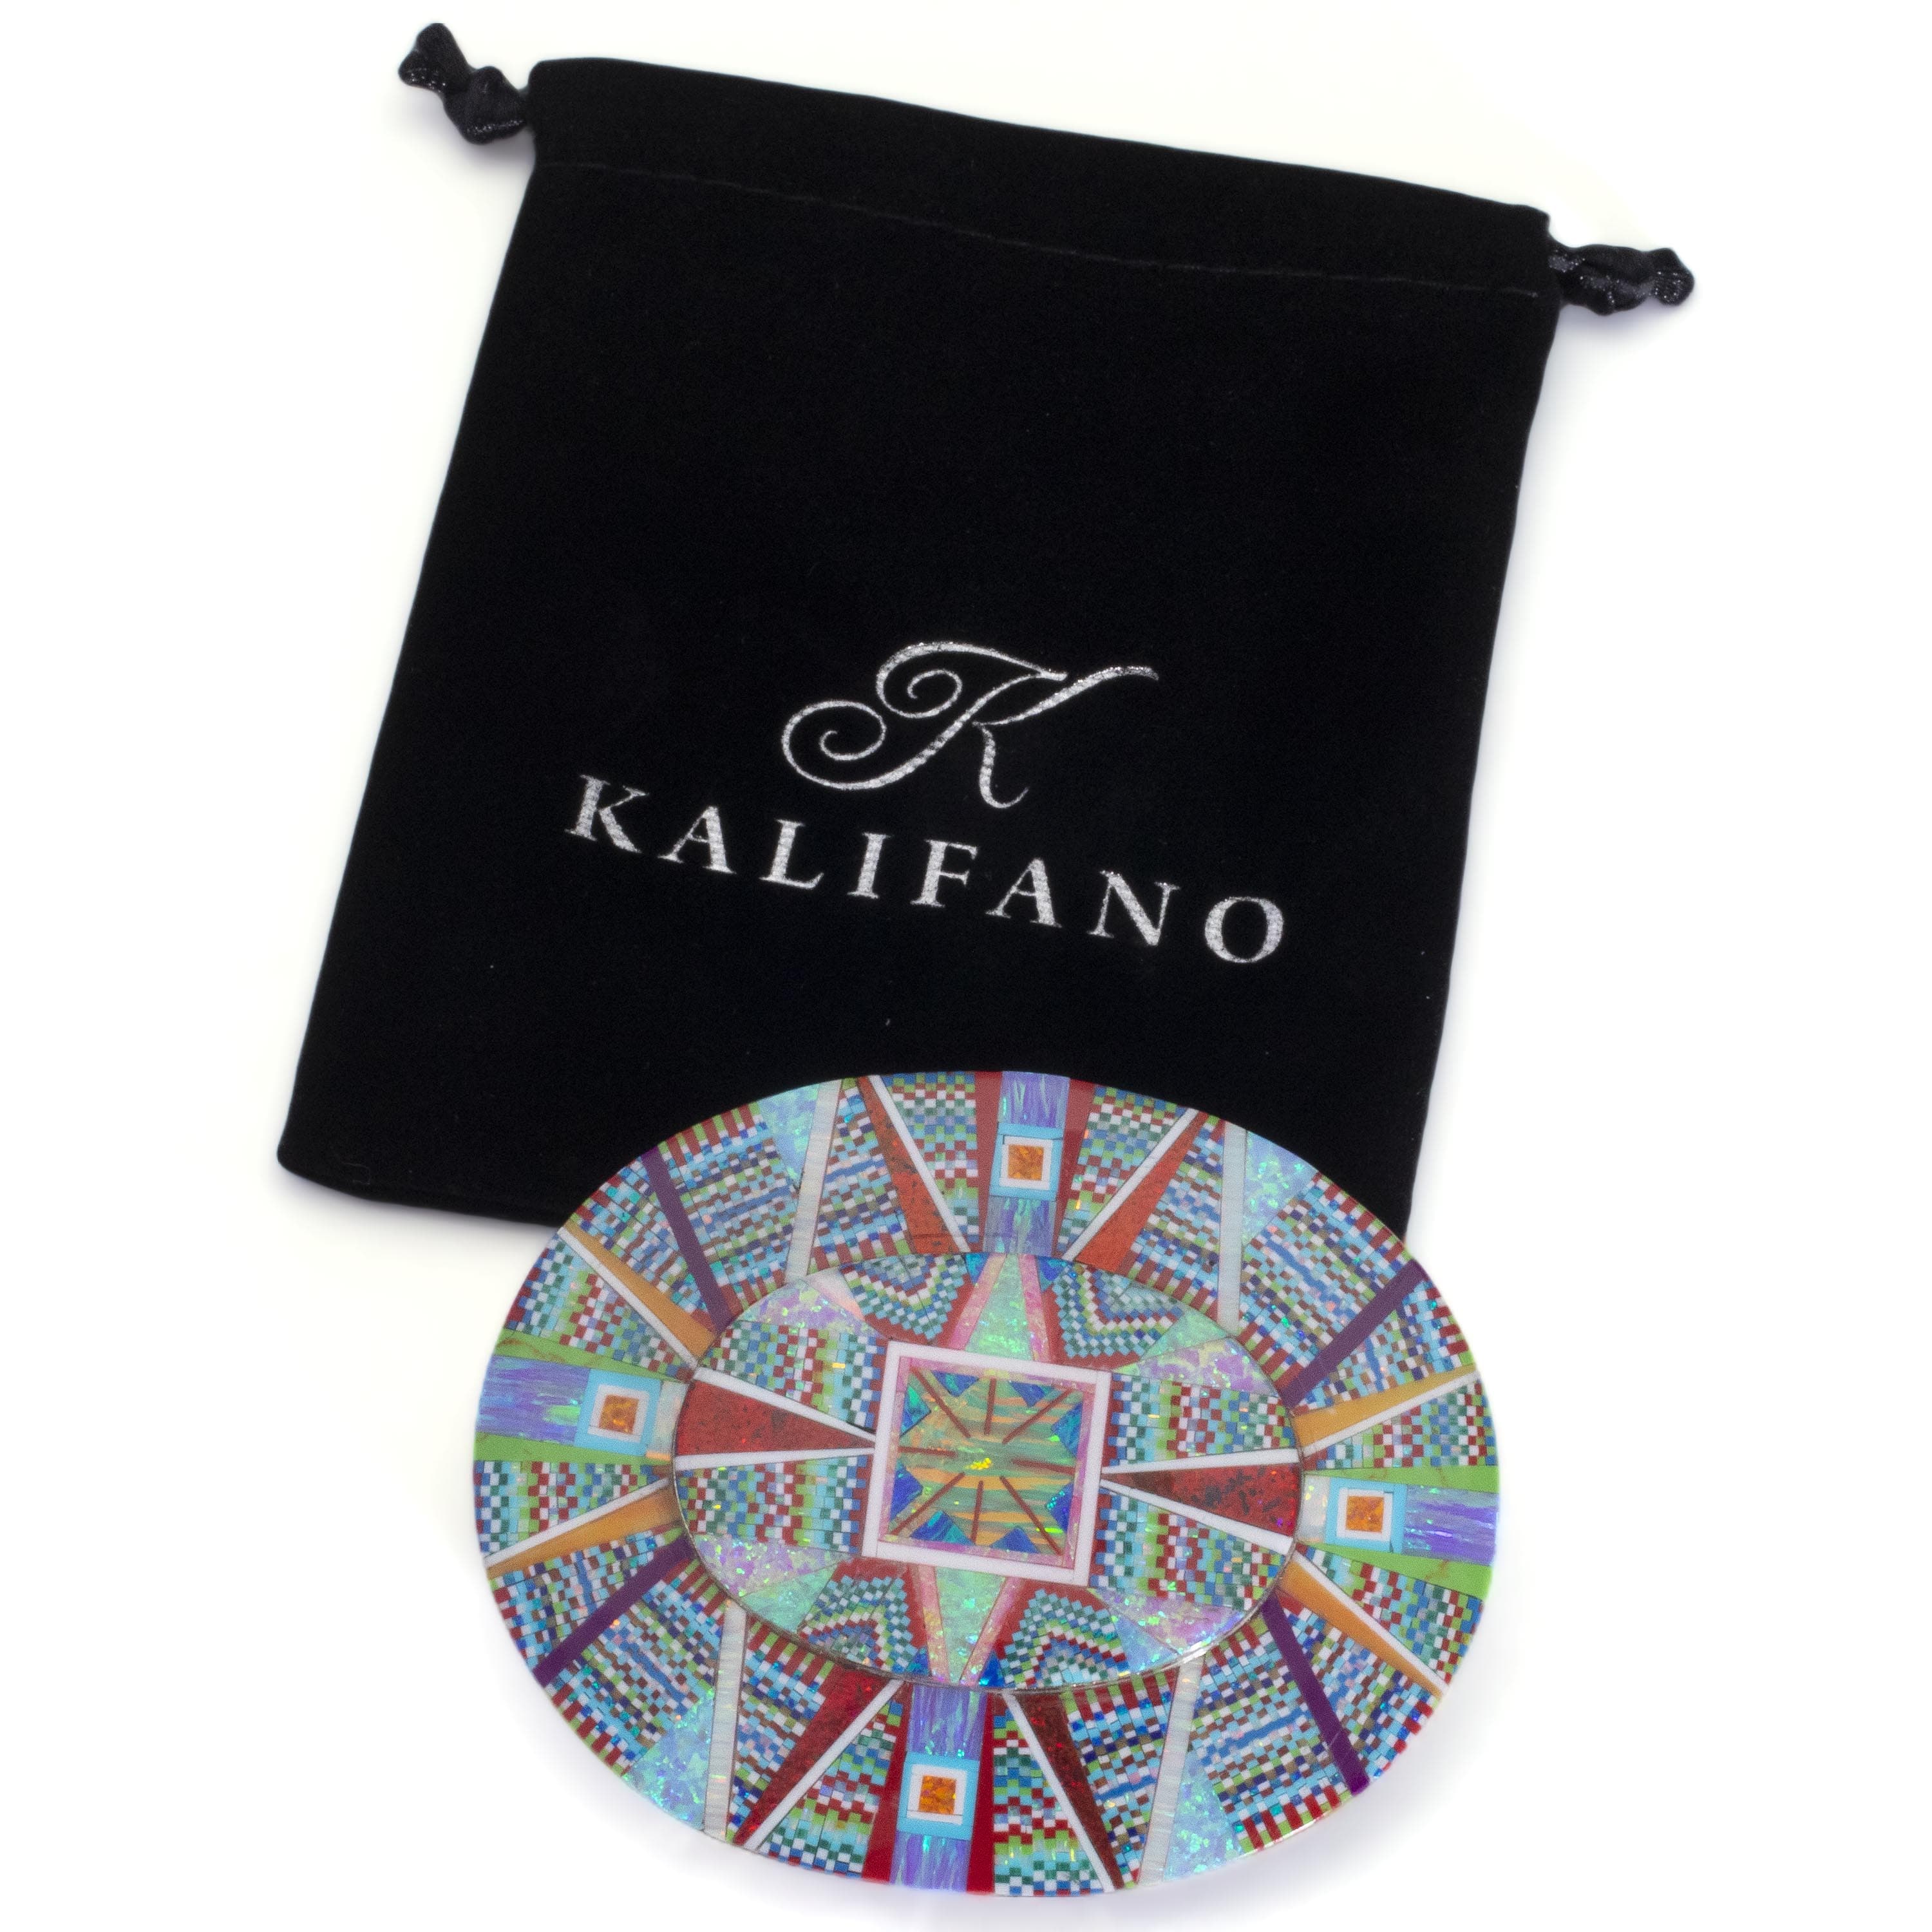 KALIFANO Southwest Silver Jewelry Multi Gem Opal Micro Inlay with Genuine Turquoise and Coral Handmade 925 Sterling Silver Oval Belt Buckle AKBB1800.004